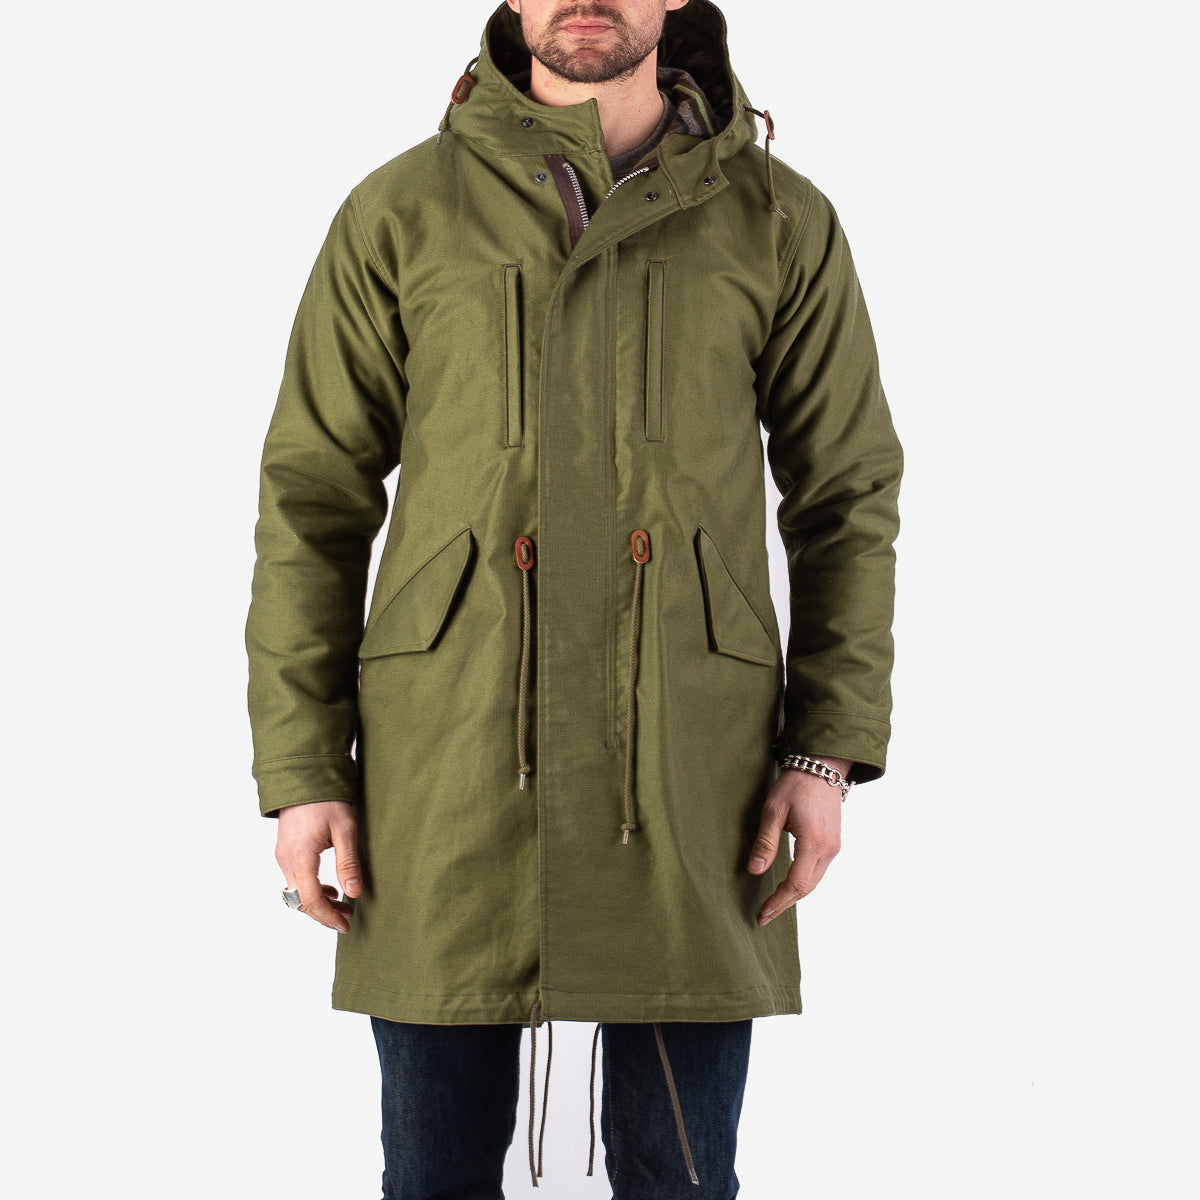 Iron Heart IHM-34 Olive Drab – M-51 Coat Whipcord Field